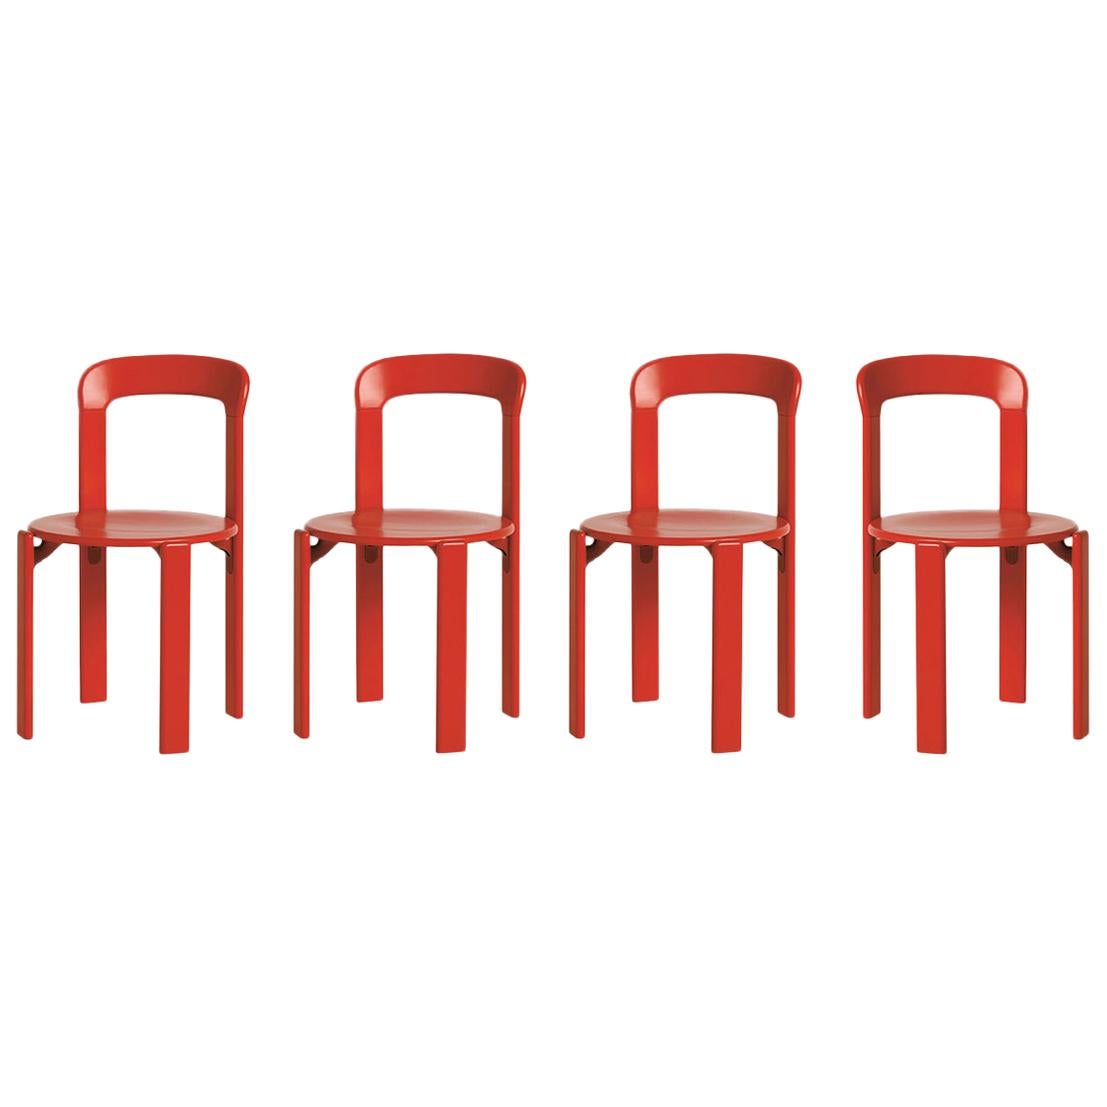 Set of 4 Red Rey Chairs by Dietiker, a Swiss Icon since 1971